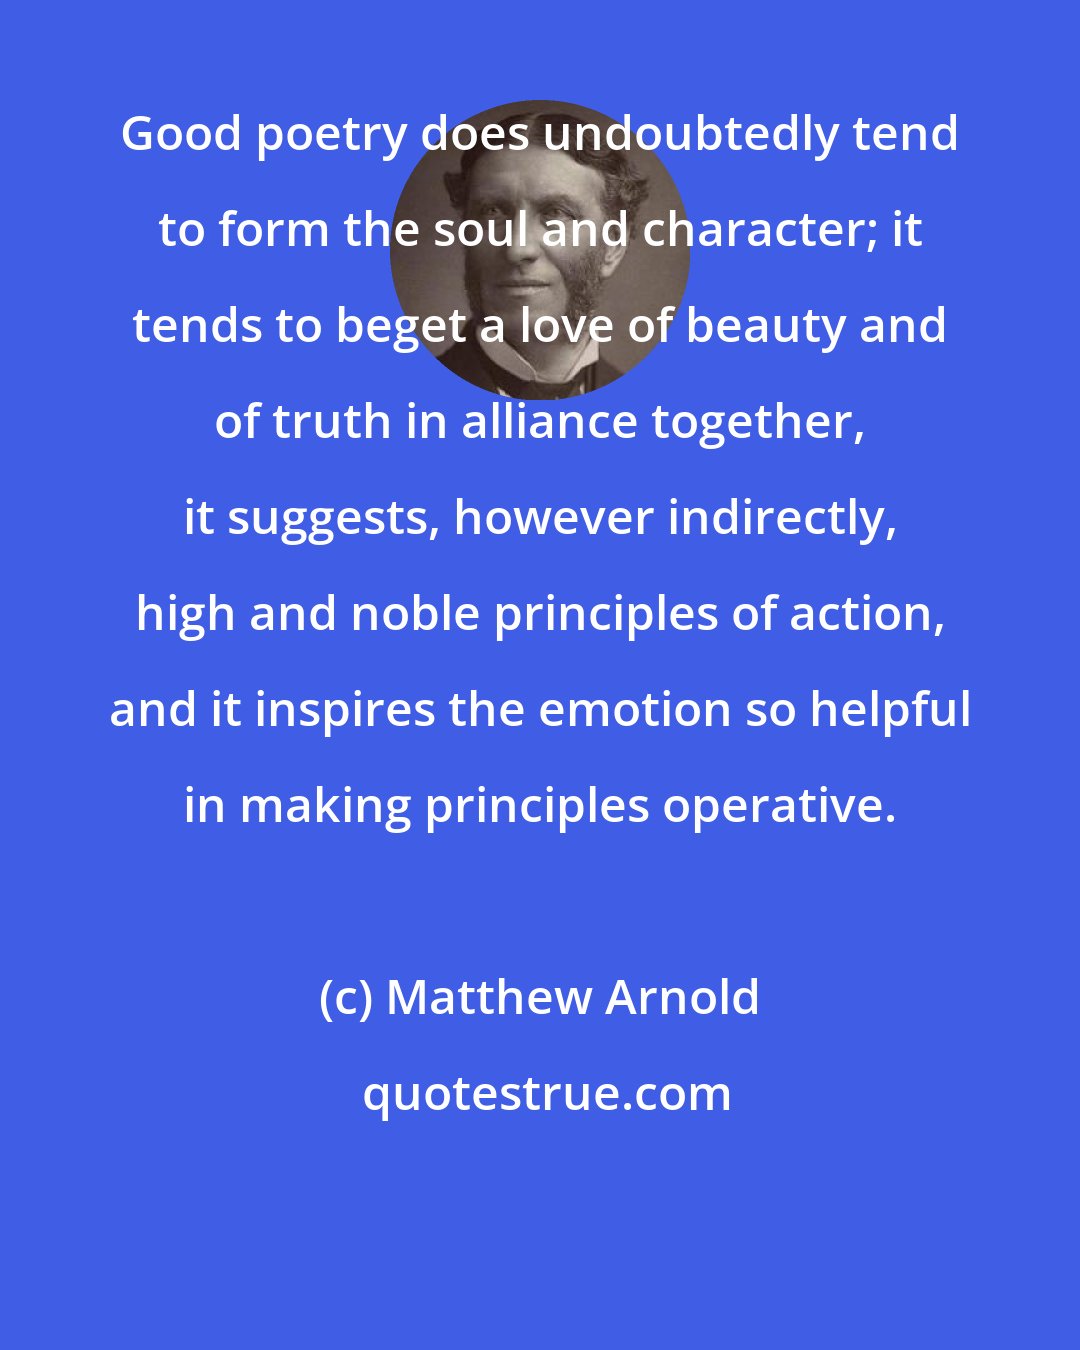 Matthew Arnold: Good poetry does undoubtedly tend to form the soul and character; it tends to beget a love of beauty and of truth in alliance together, it suggests, however indirectly, high and noble principles of action, and it inspires the emotion so helpful in making principles operative.